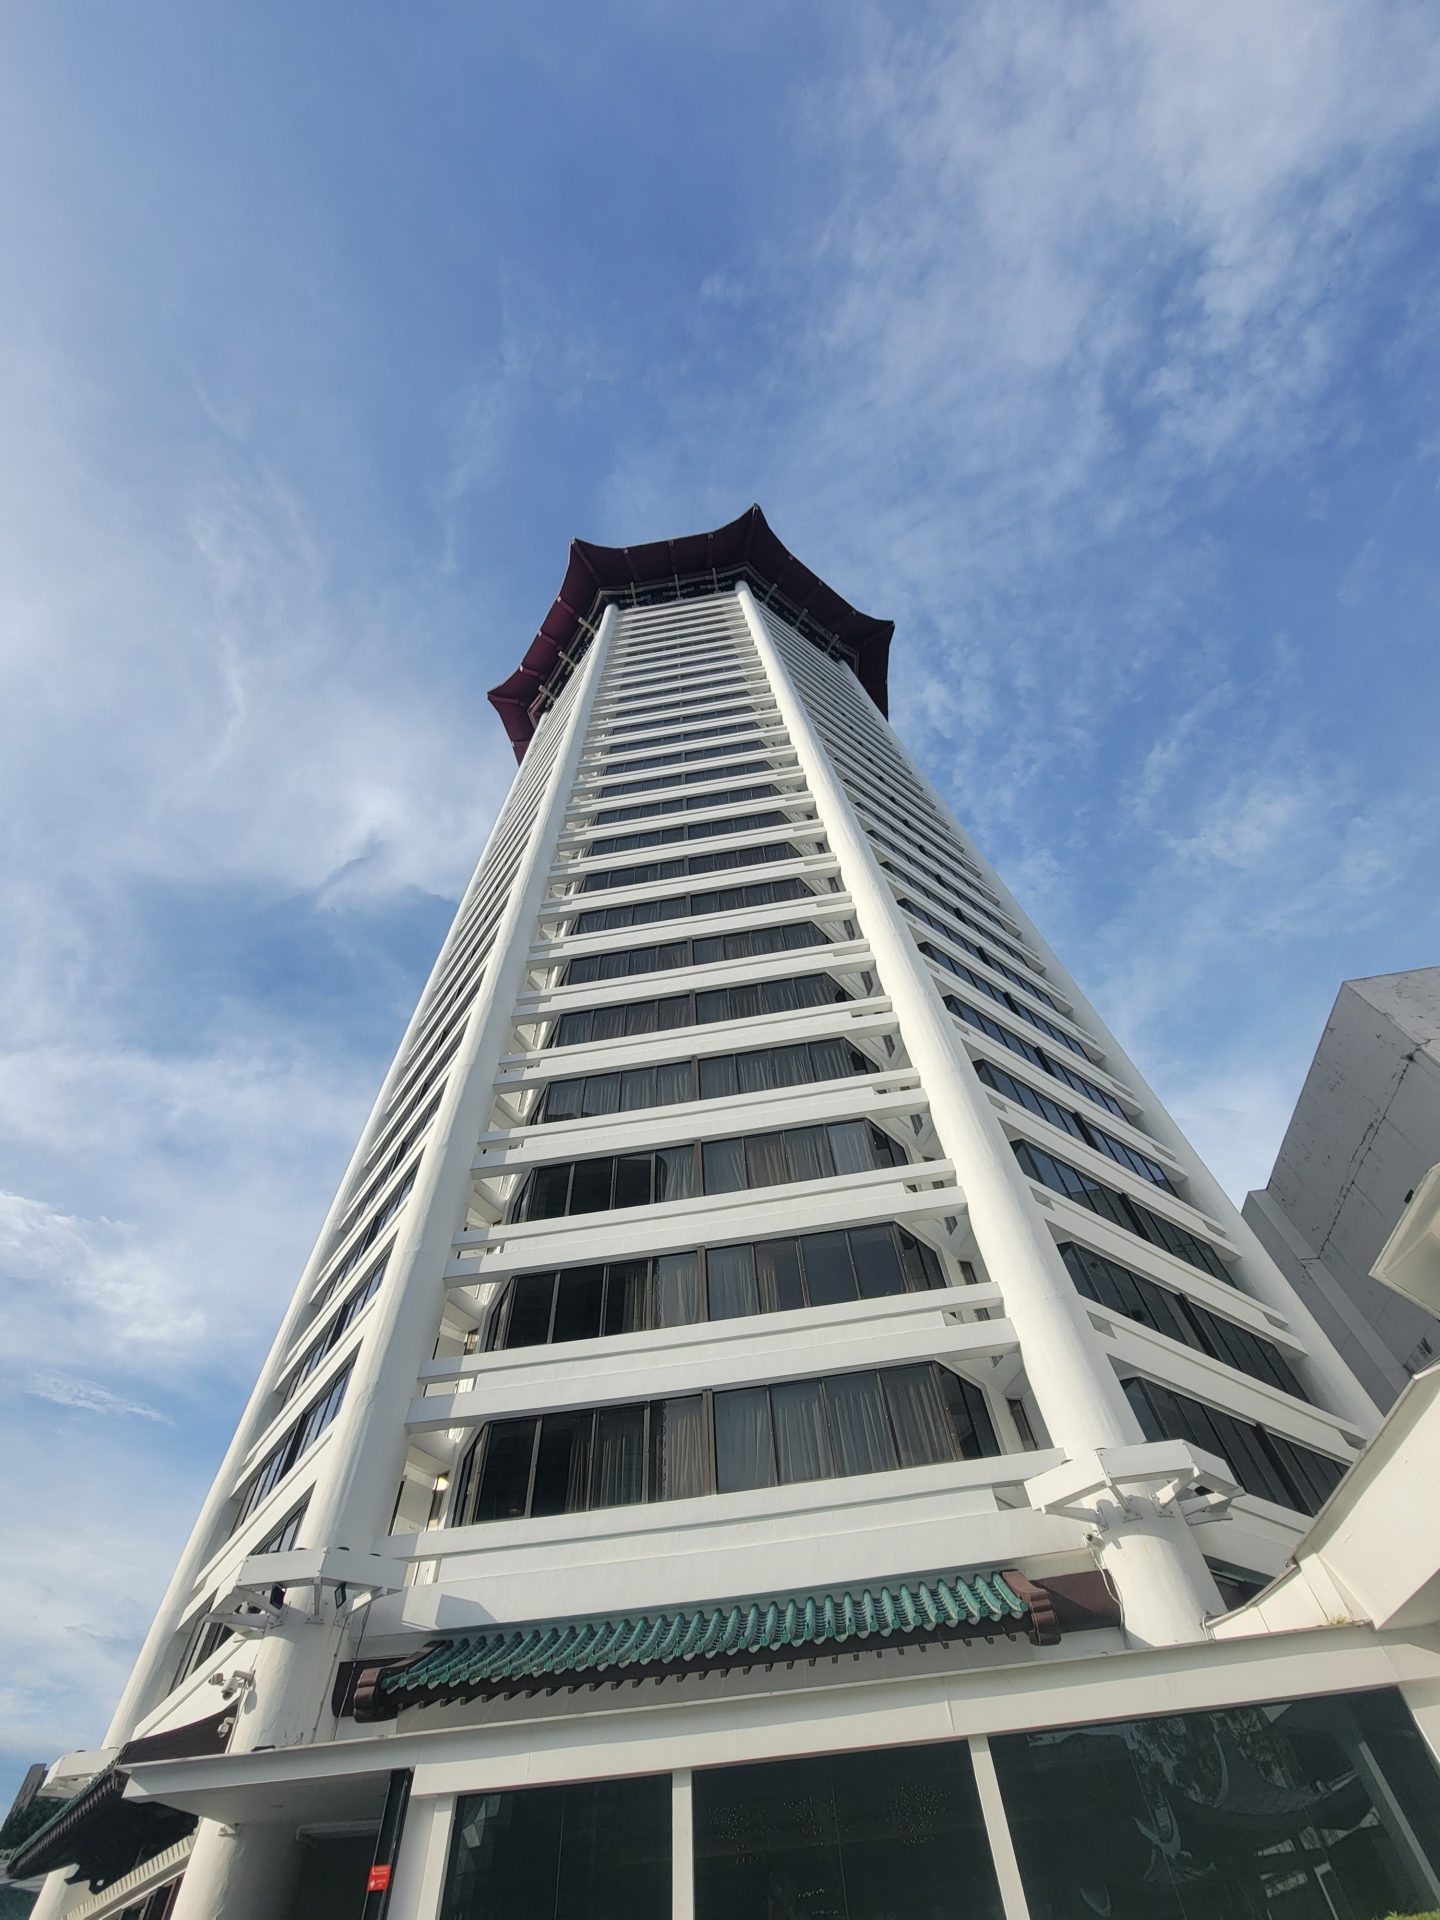 a tall building with a red roof